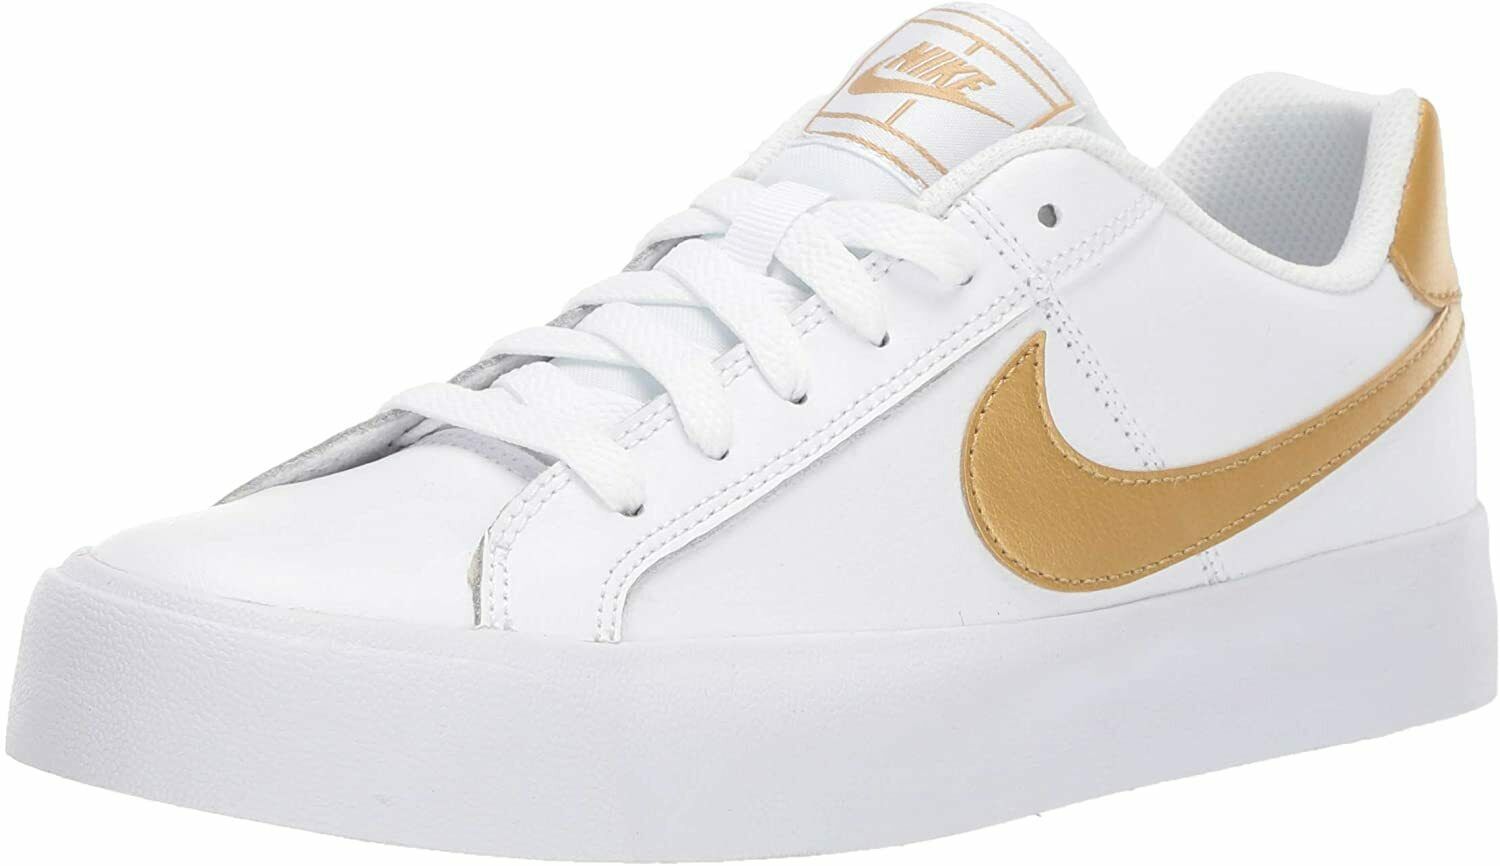 Nike Women's Court Royale AC Casual Sneakers Shoes White Gold NWT AO2810-109 - Occupational